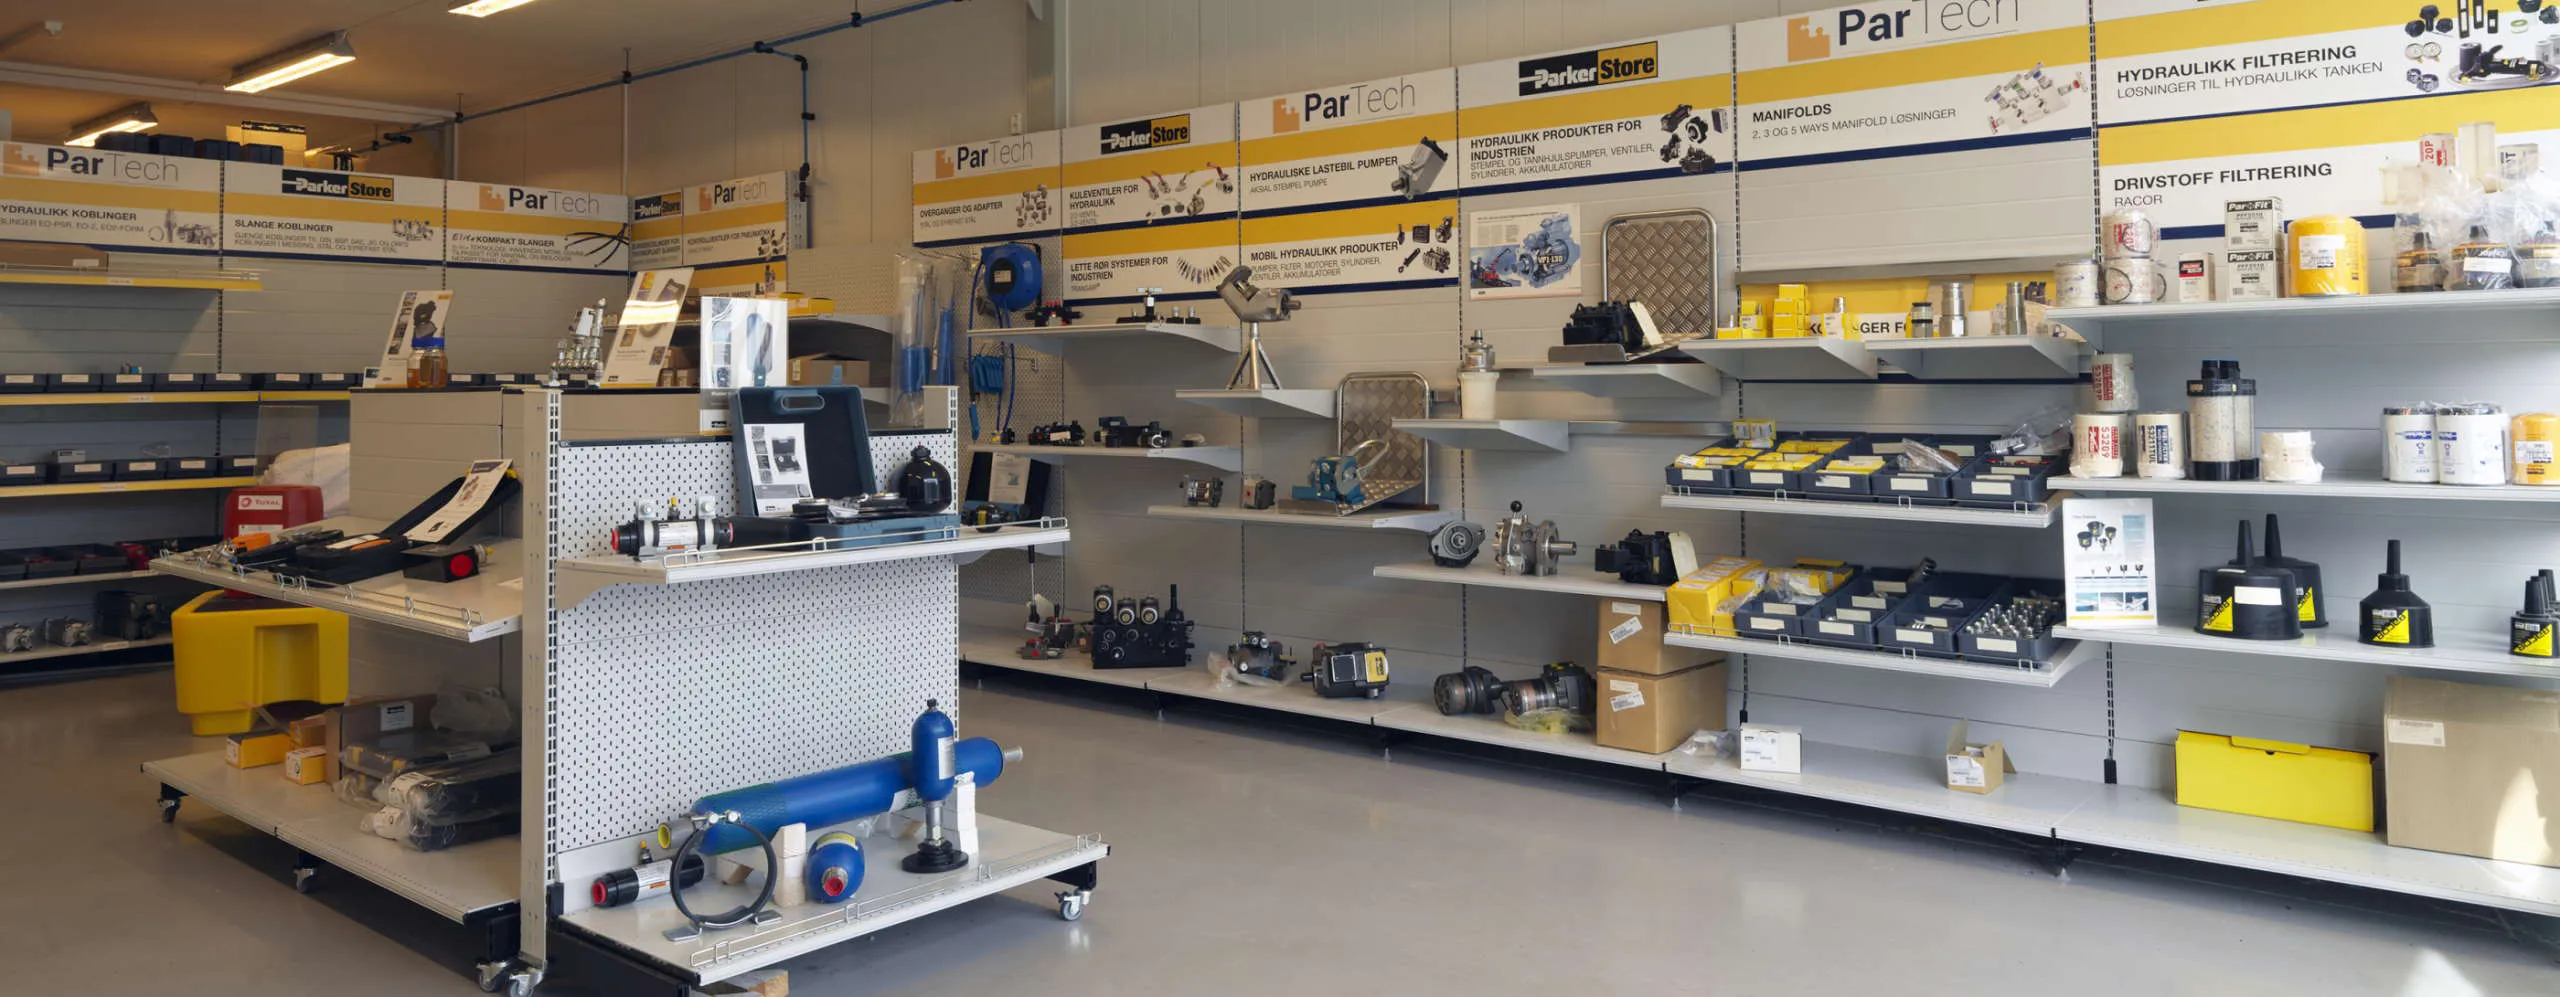 View of our store's interior, showcasing various shelves with hydraulic products